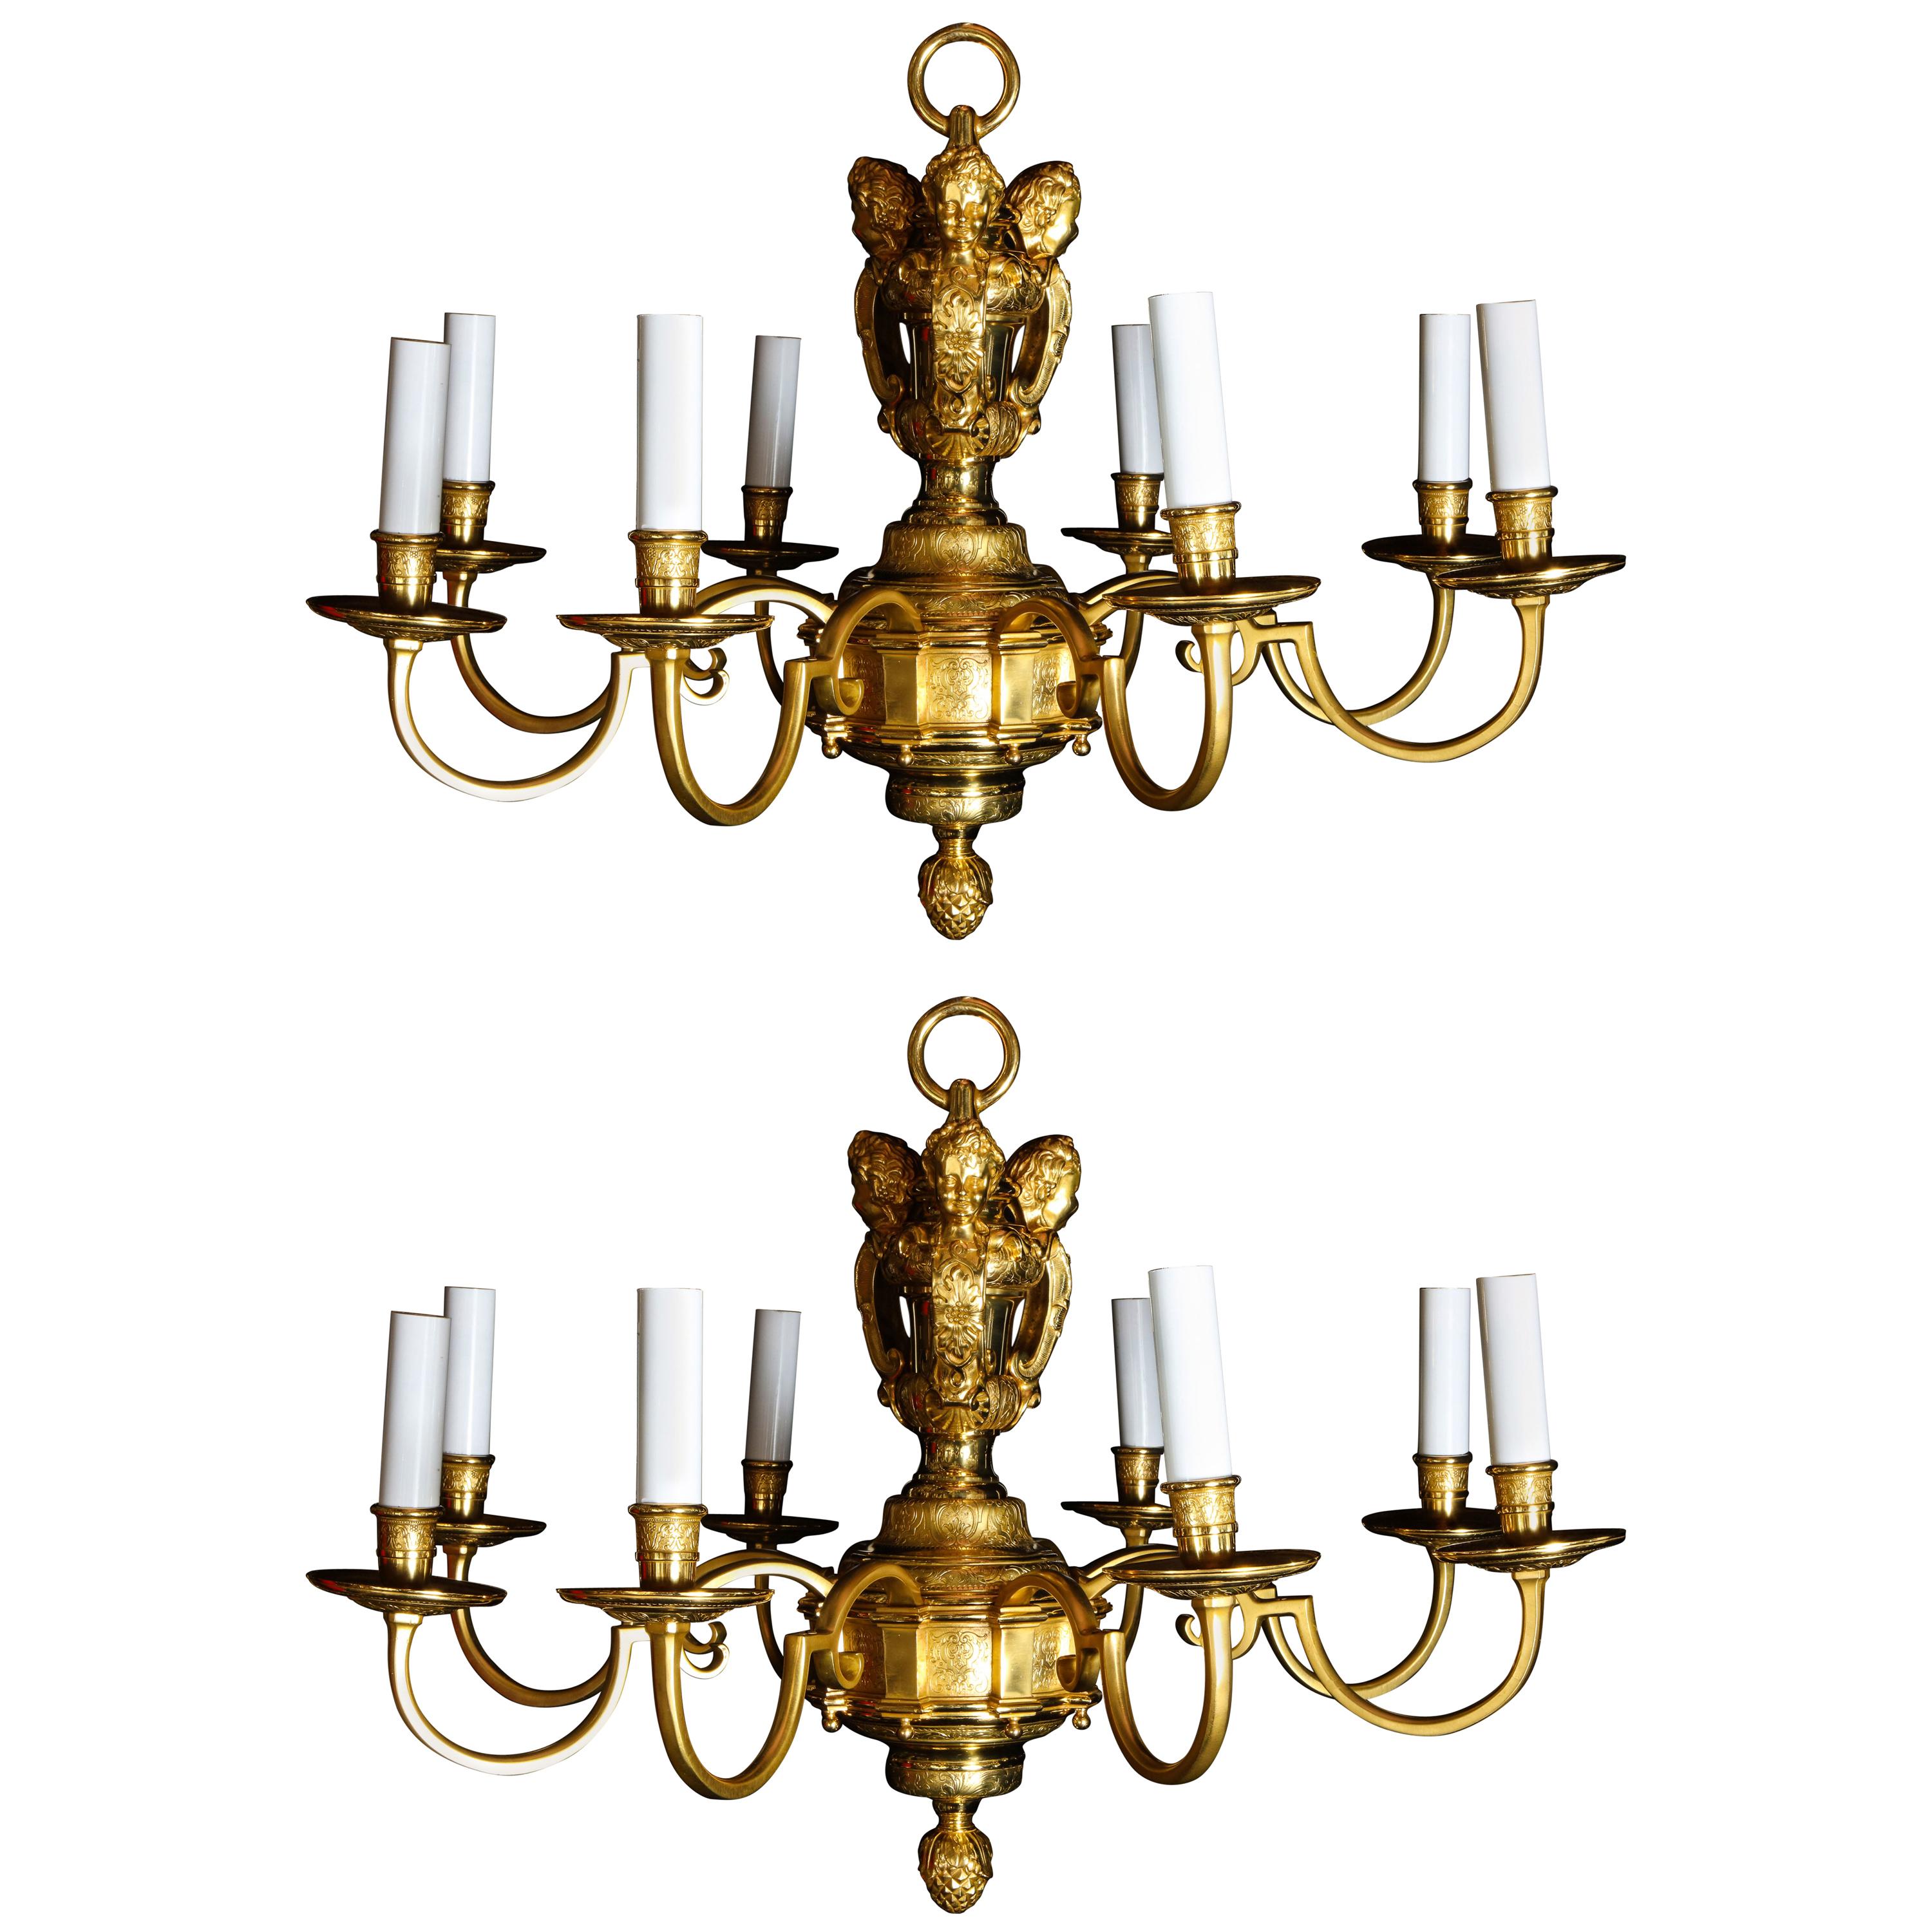 Pair of Fine Antique French Louis XVI Style Gilt Bronze Figural Chandeliers For Sale